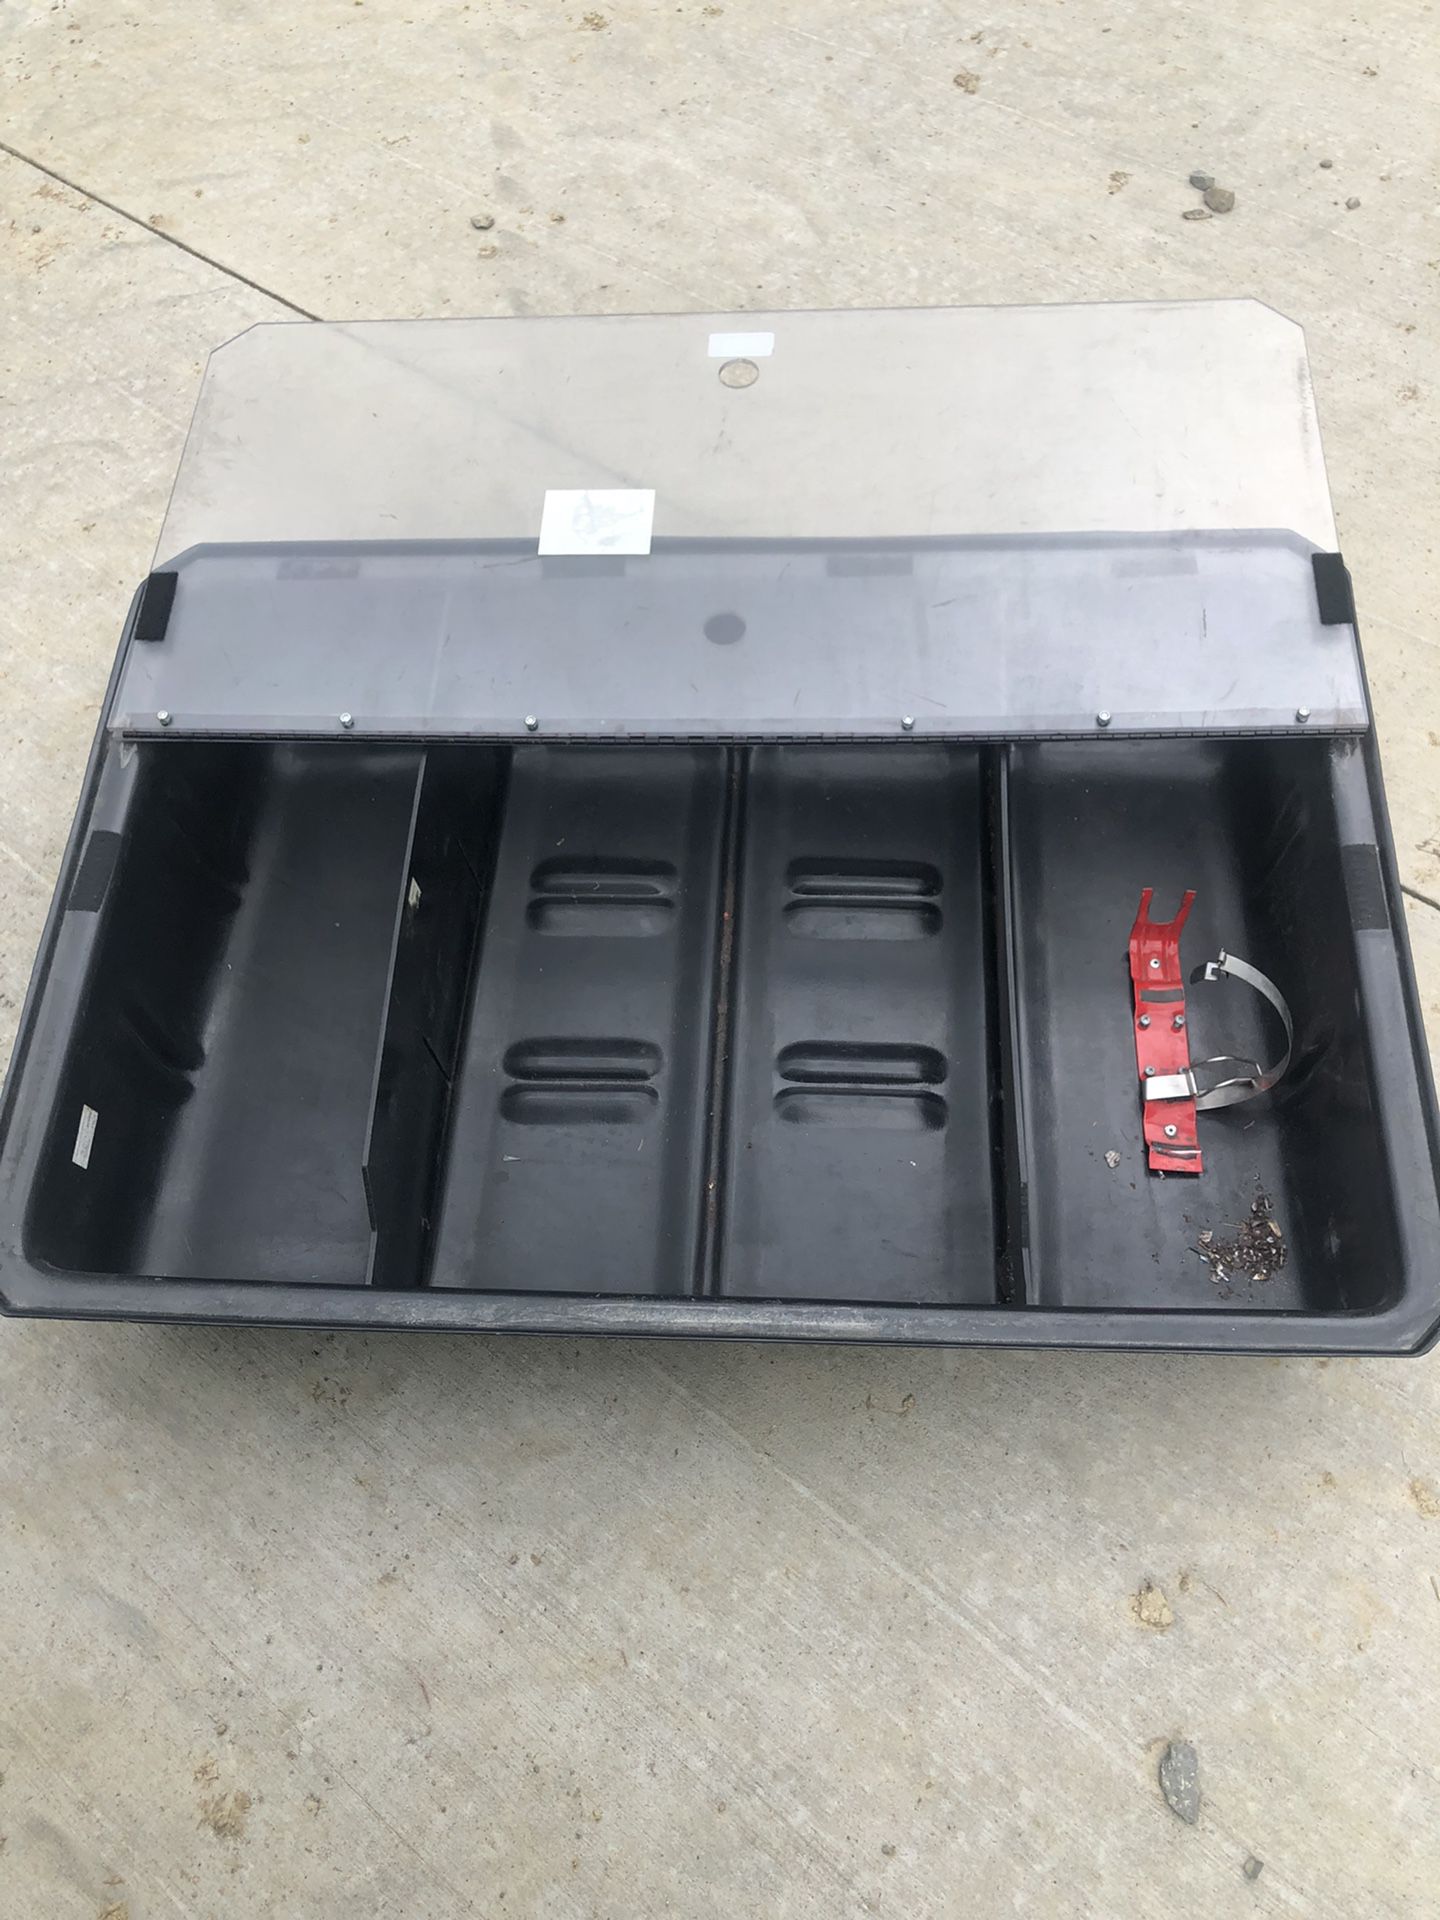 POLICE FIRE EMS SECURITY PRO-GARD D3825L CUSTOM FIT TRUNK ORGANIZER WITH LID ONLY $75 RETAILS $345